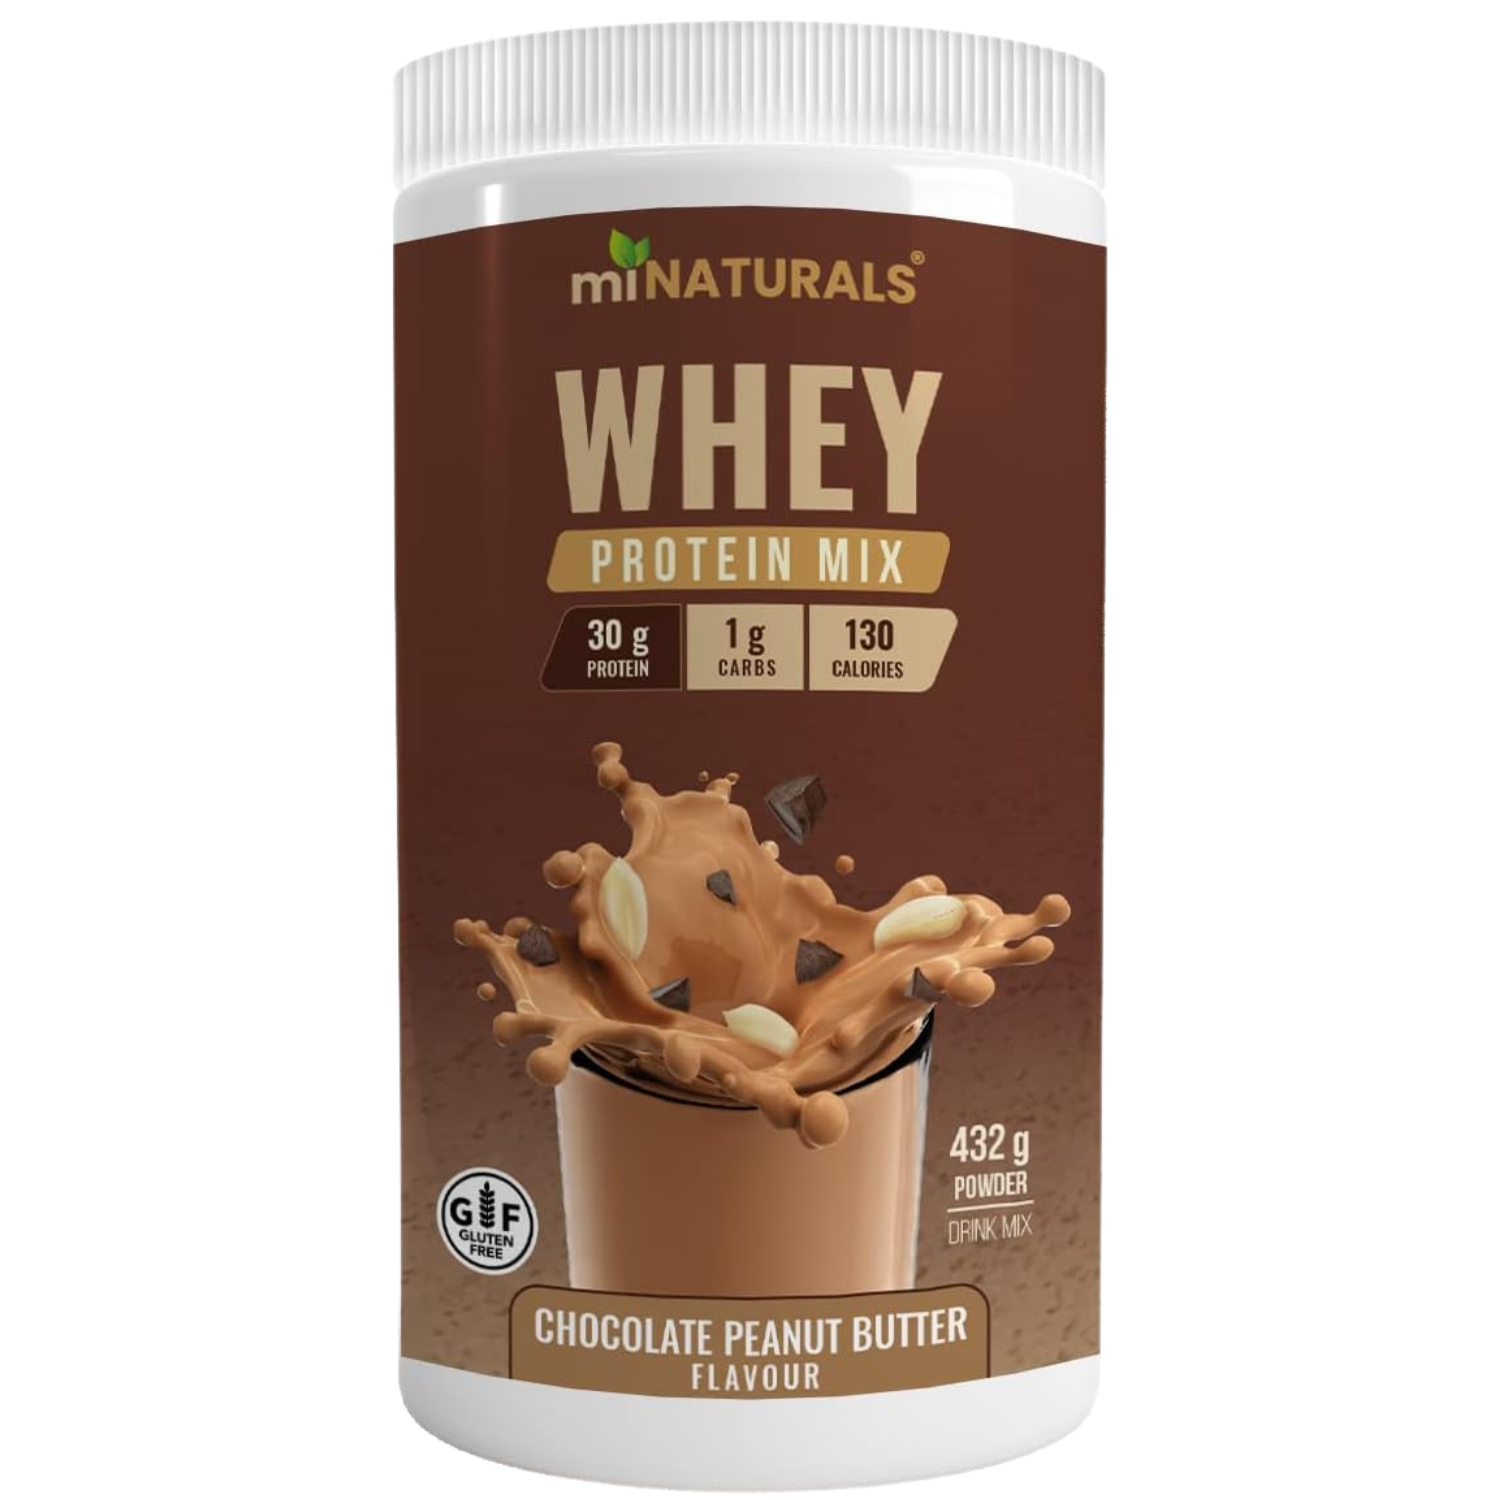 Whey Pure Isolate High Protein Drink Mix Powder - 432 g (Chocolate Peanut Butter)